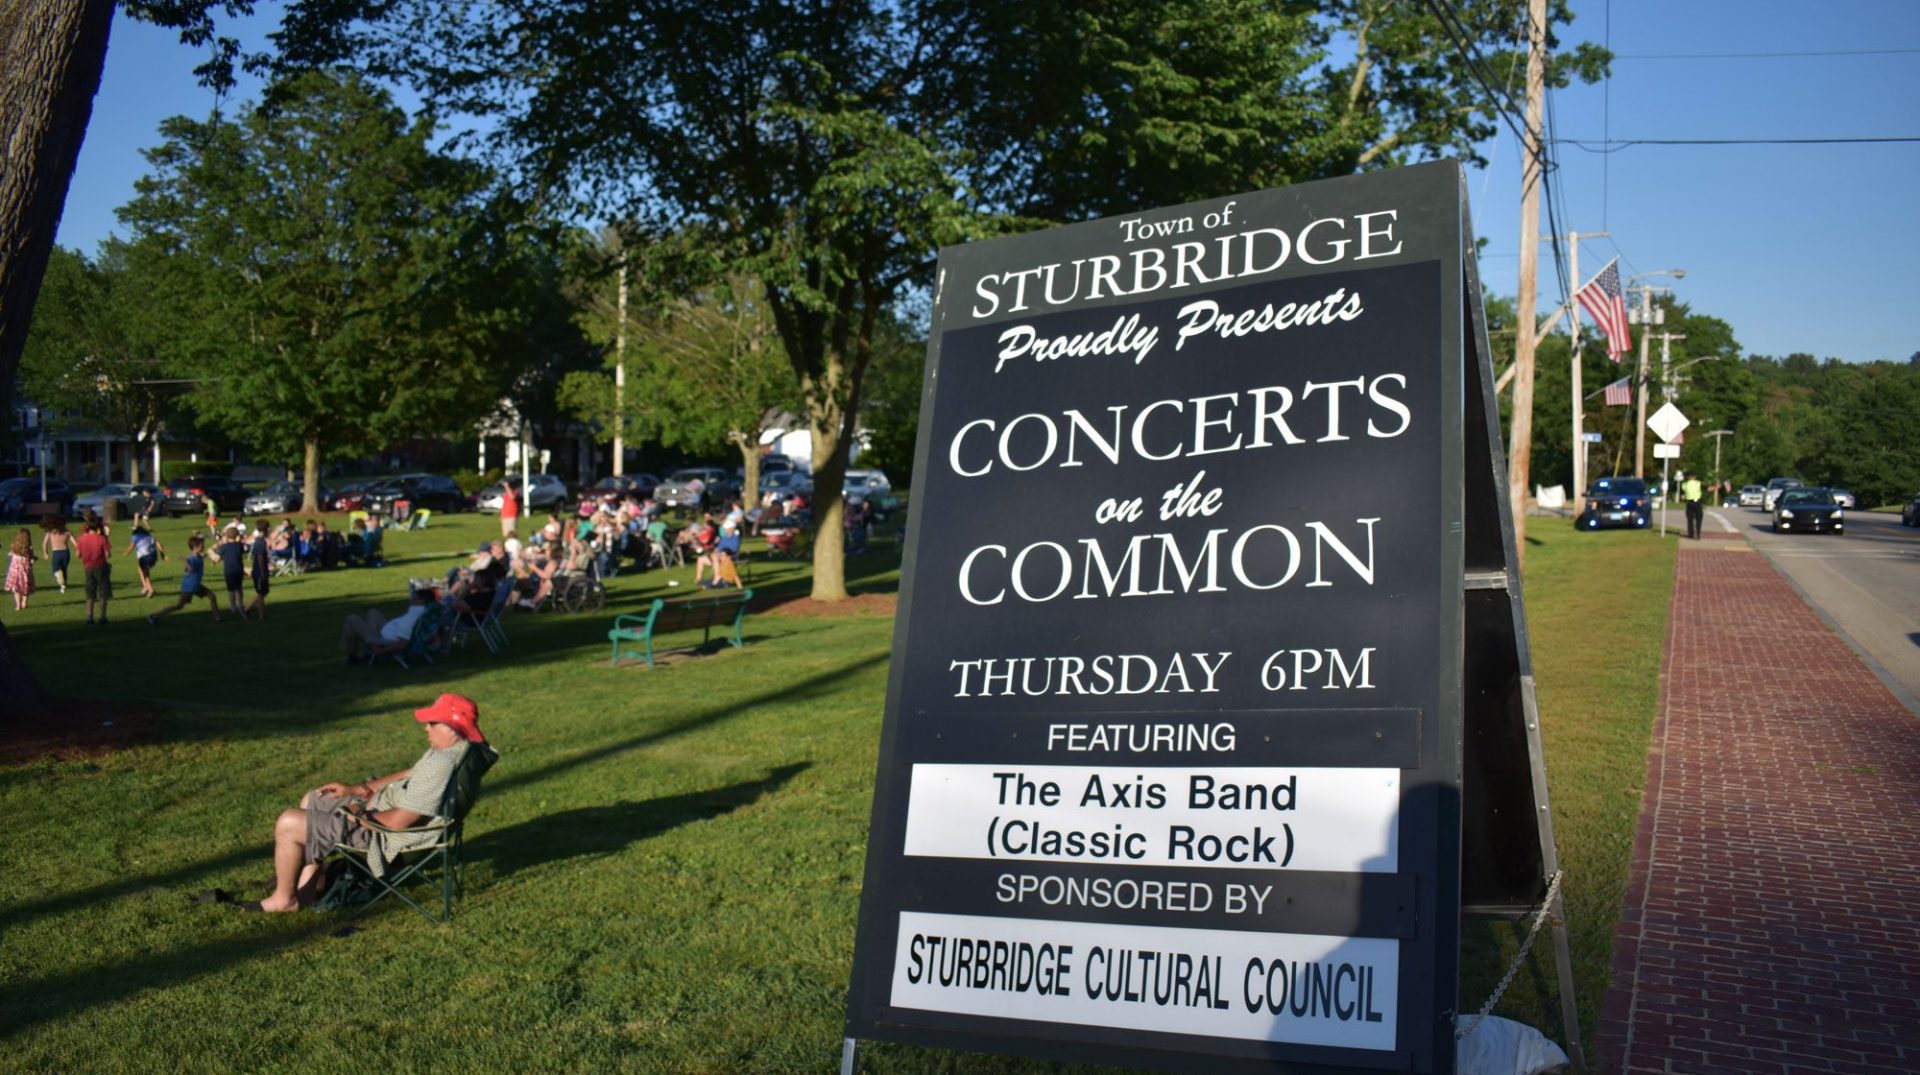 Concerts on the Common signage